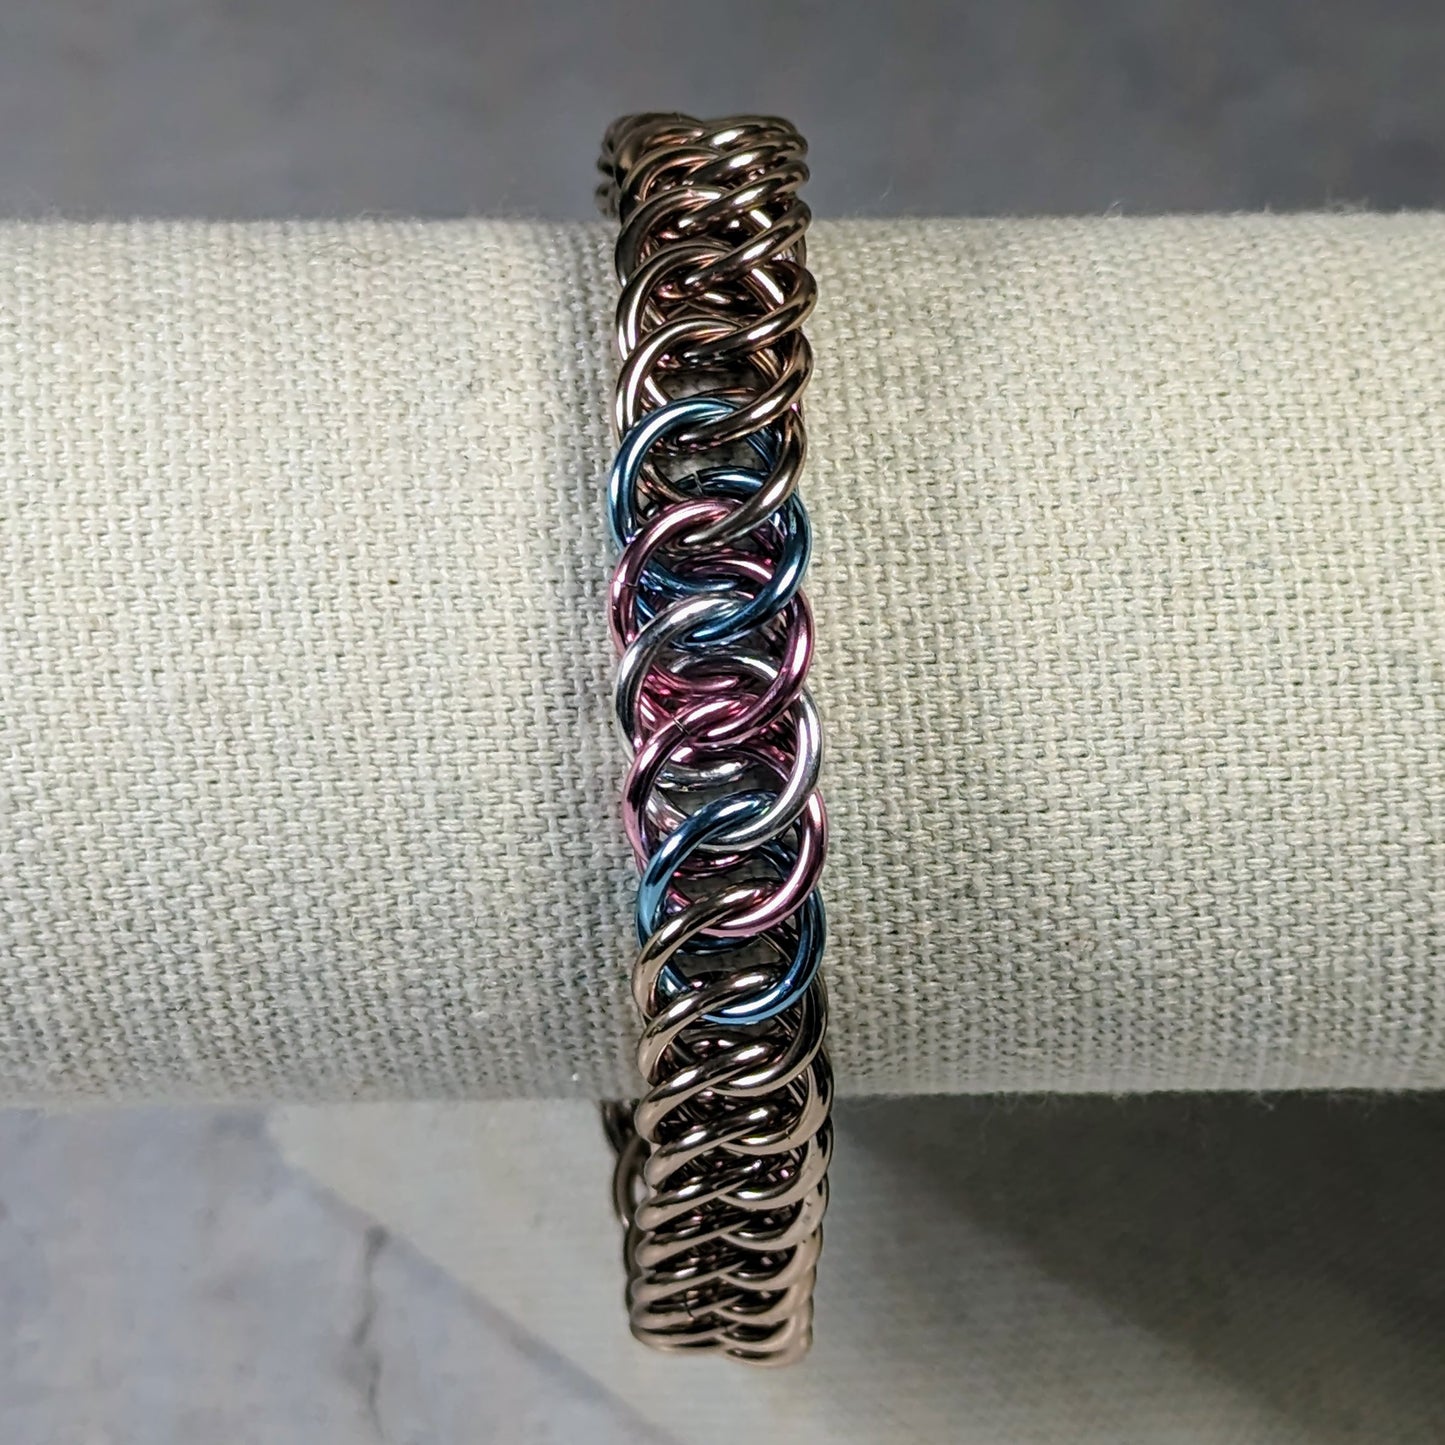 Trans pride flag chainmaille bracelet